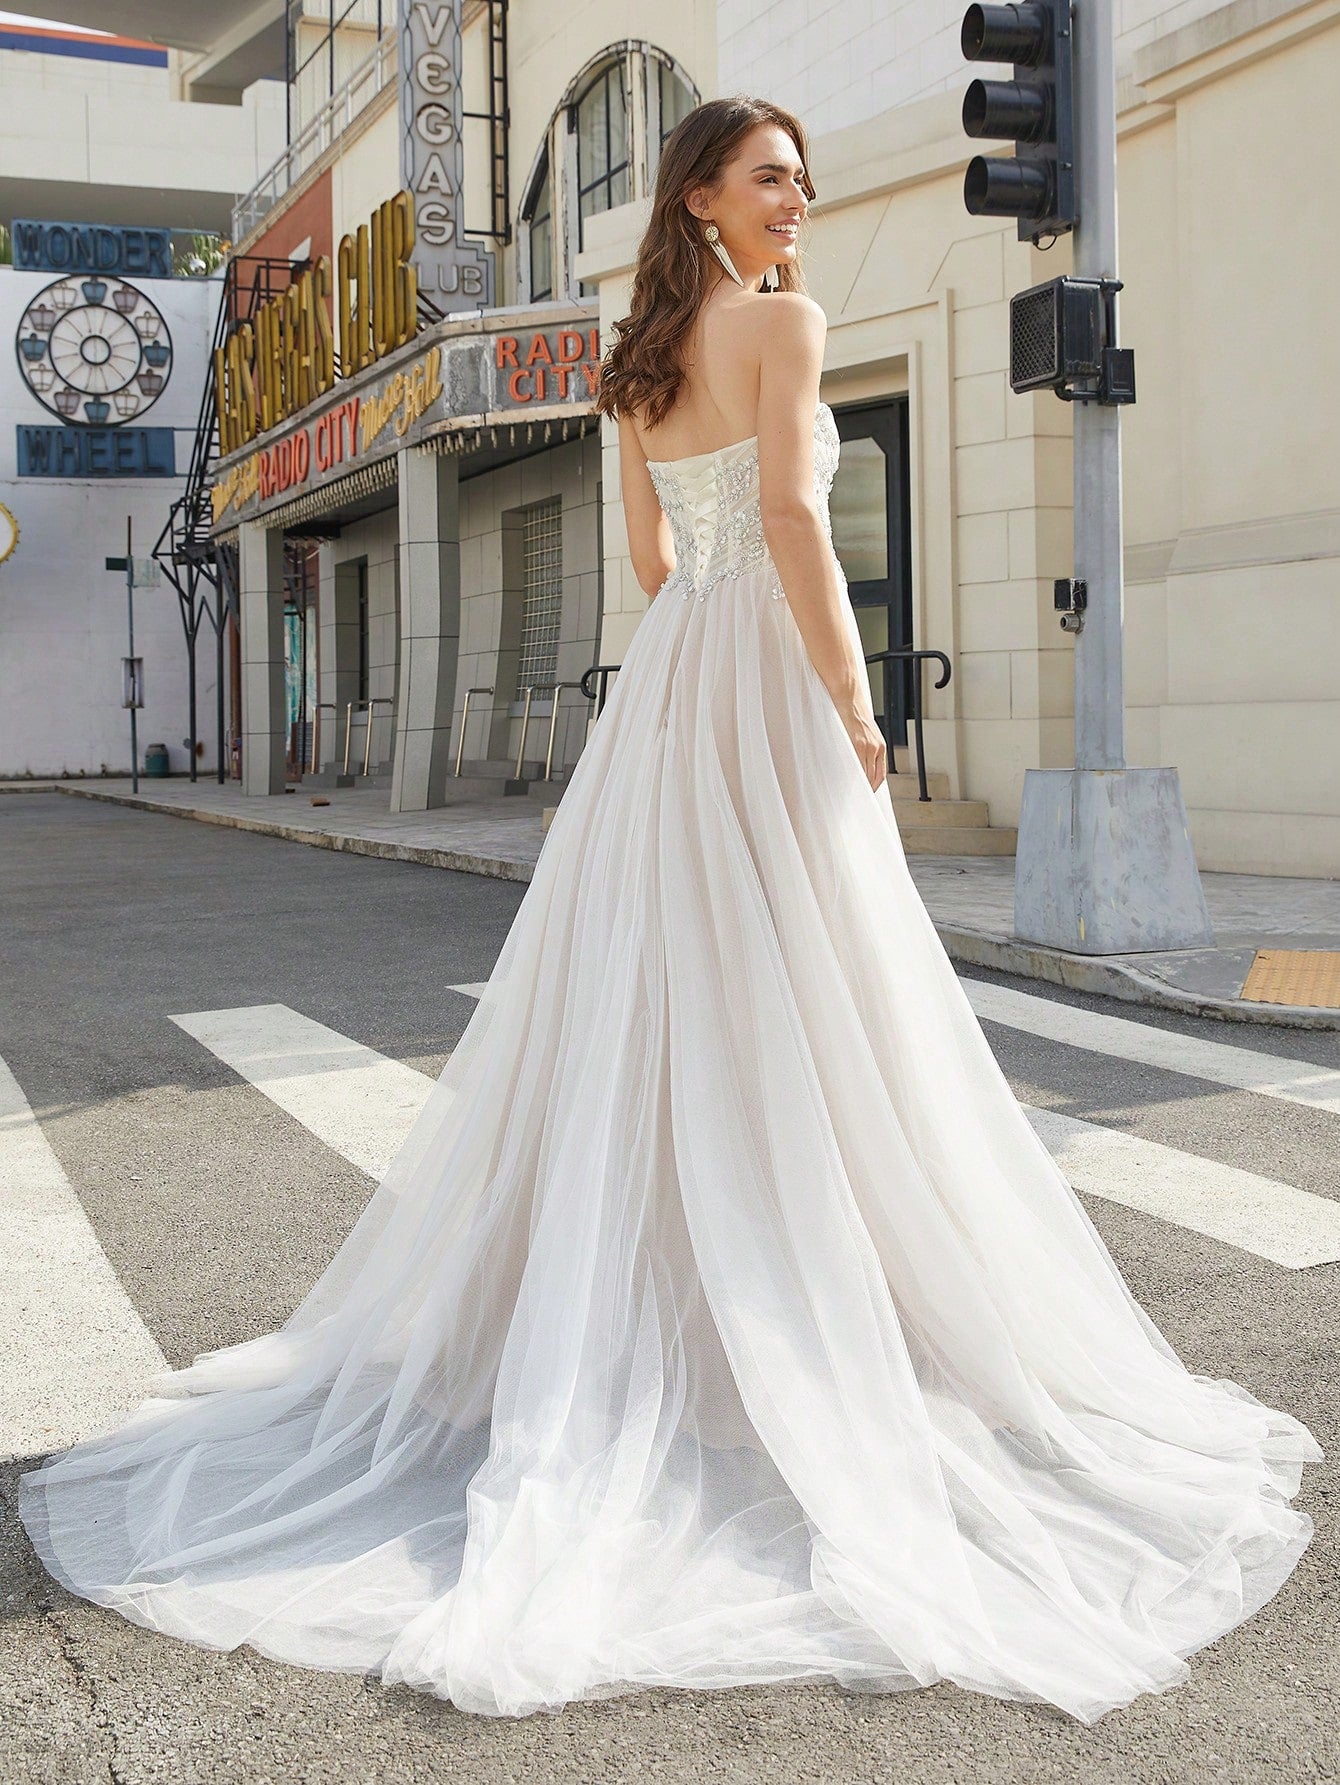 Elegant Strapless Bridal Gown with Sequin Embellishments and High-Slit Tulle Skirt